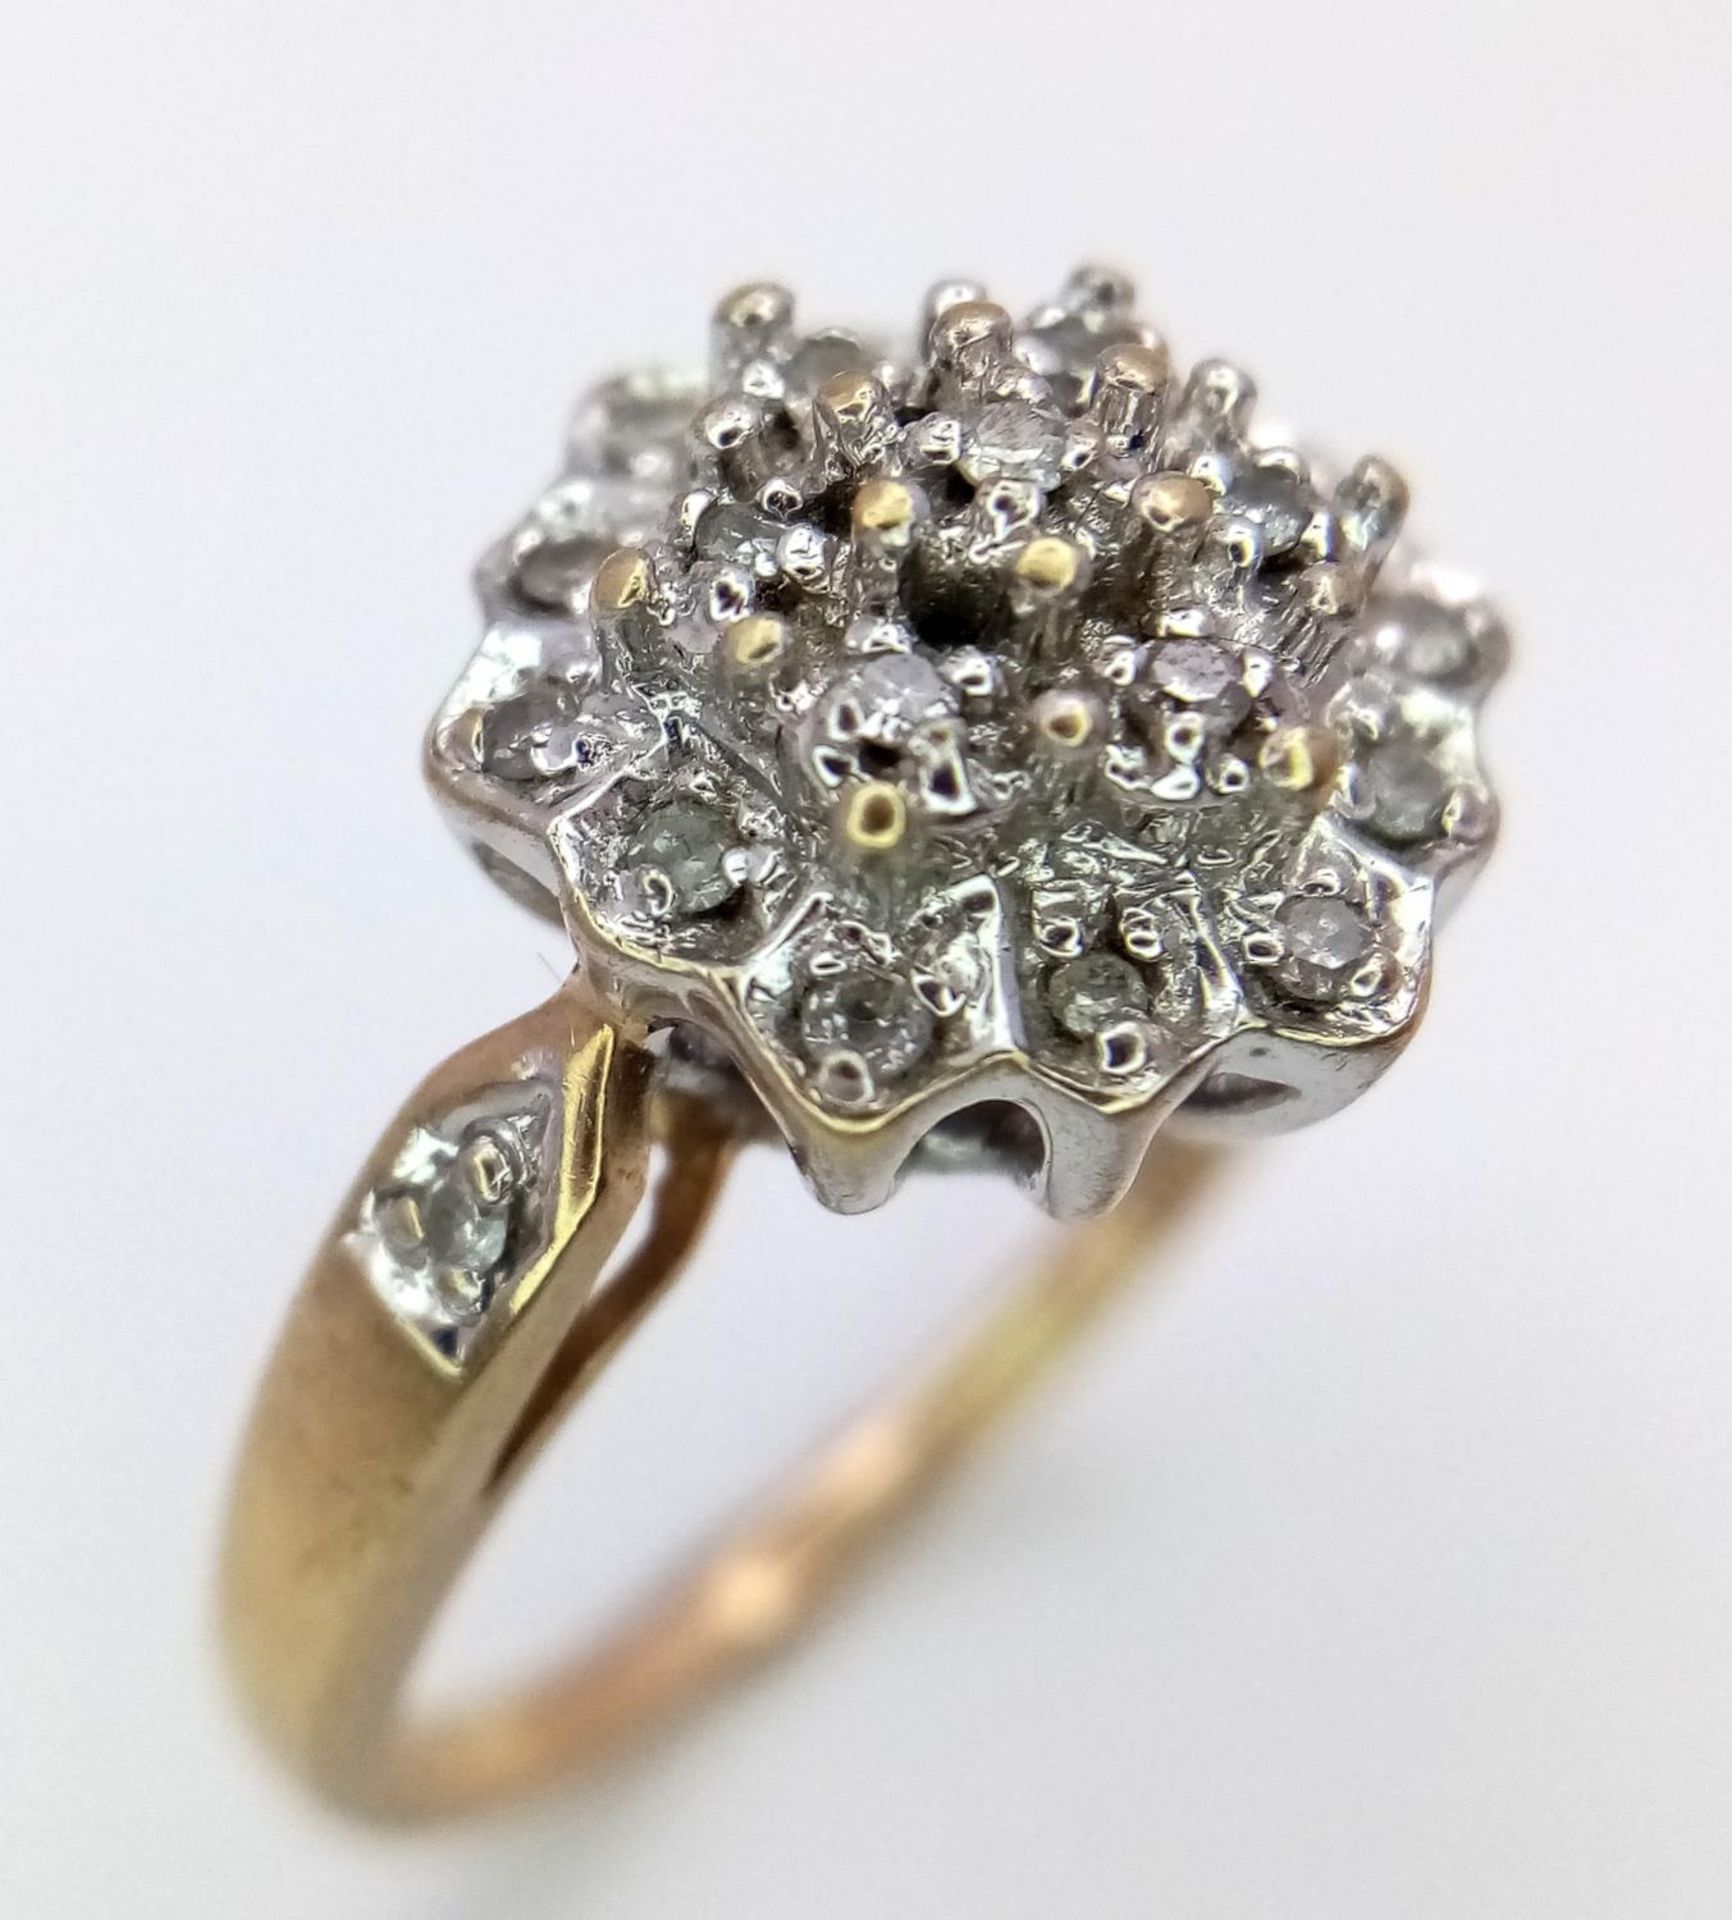 A 9K YELOW GOLD DIAMOND RING IN THE FLORAL DESIGN 0.20CT 3.6G SIZE O. SC 9003